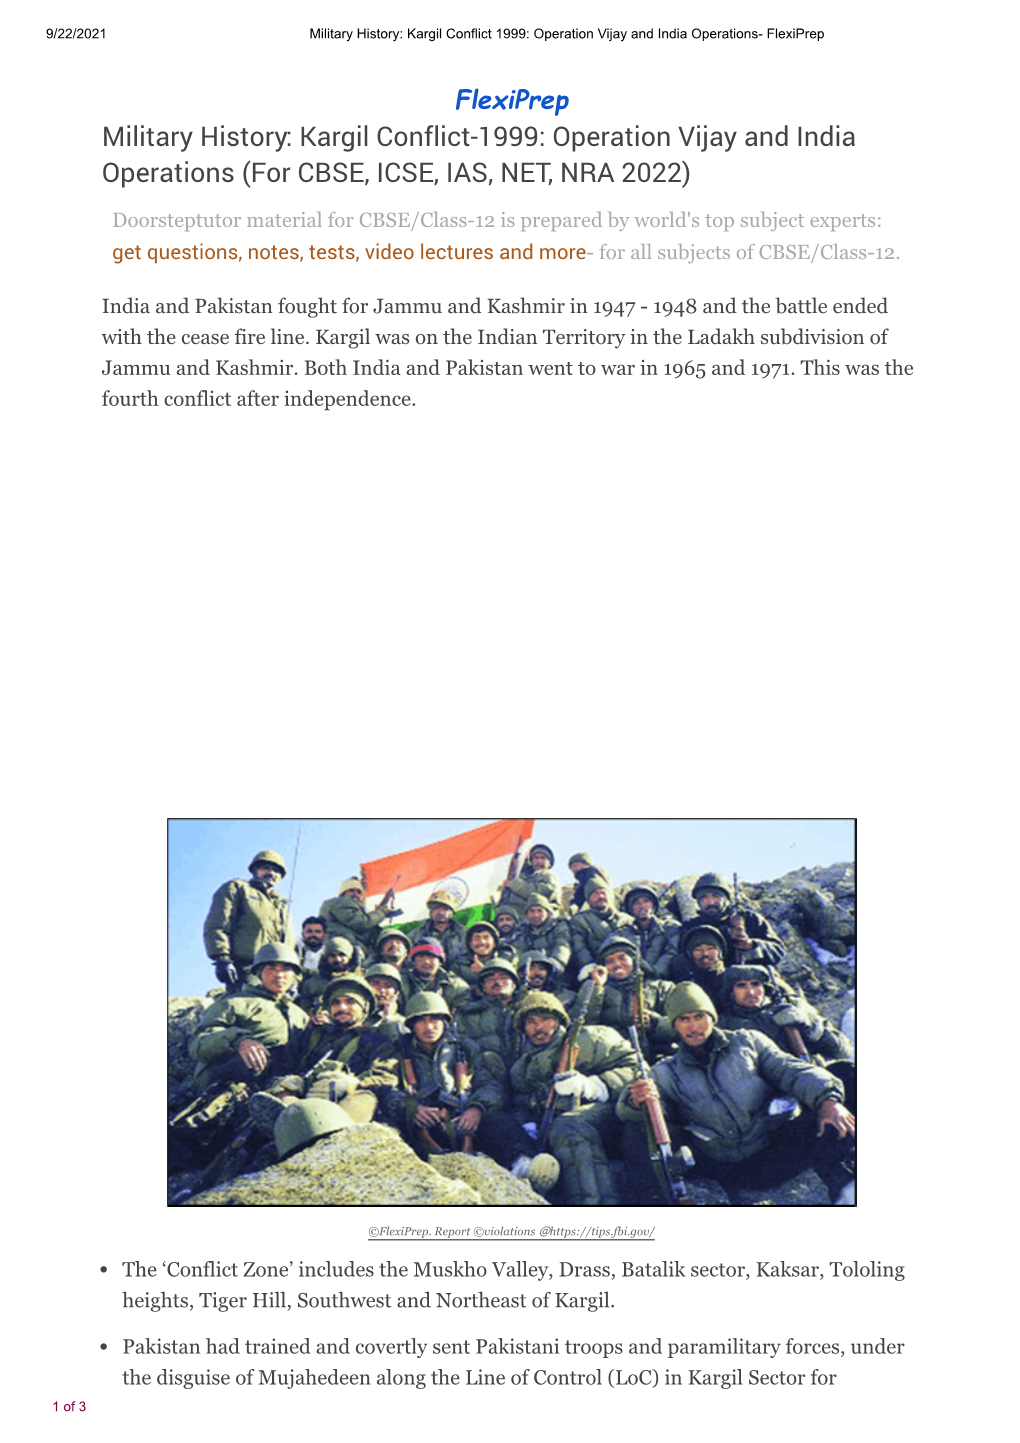 Kargil Conflict-1999: Operation Vijay and India Operations (For CBSE, ICSE, IAS, NET, NRA 2022)